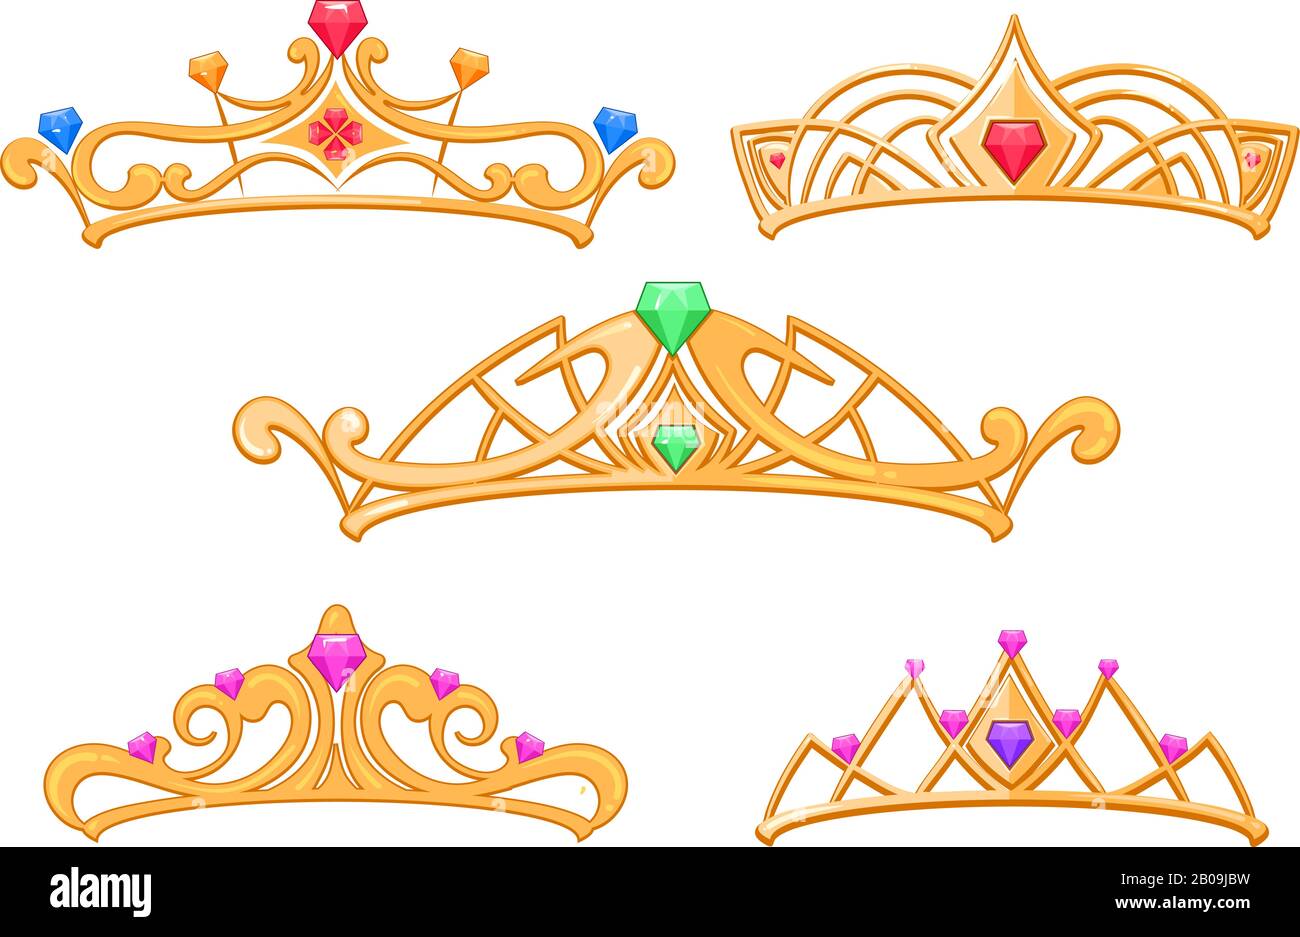 Vector princess crowns, tiaras with gems cartoon set. Luxury royal crown with precious stone, illustration of fashion golden crowns Stock Vector